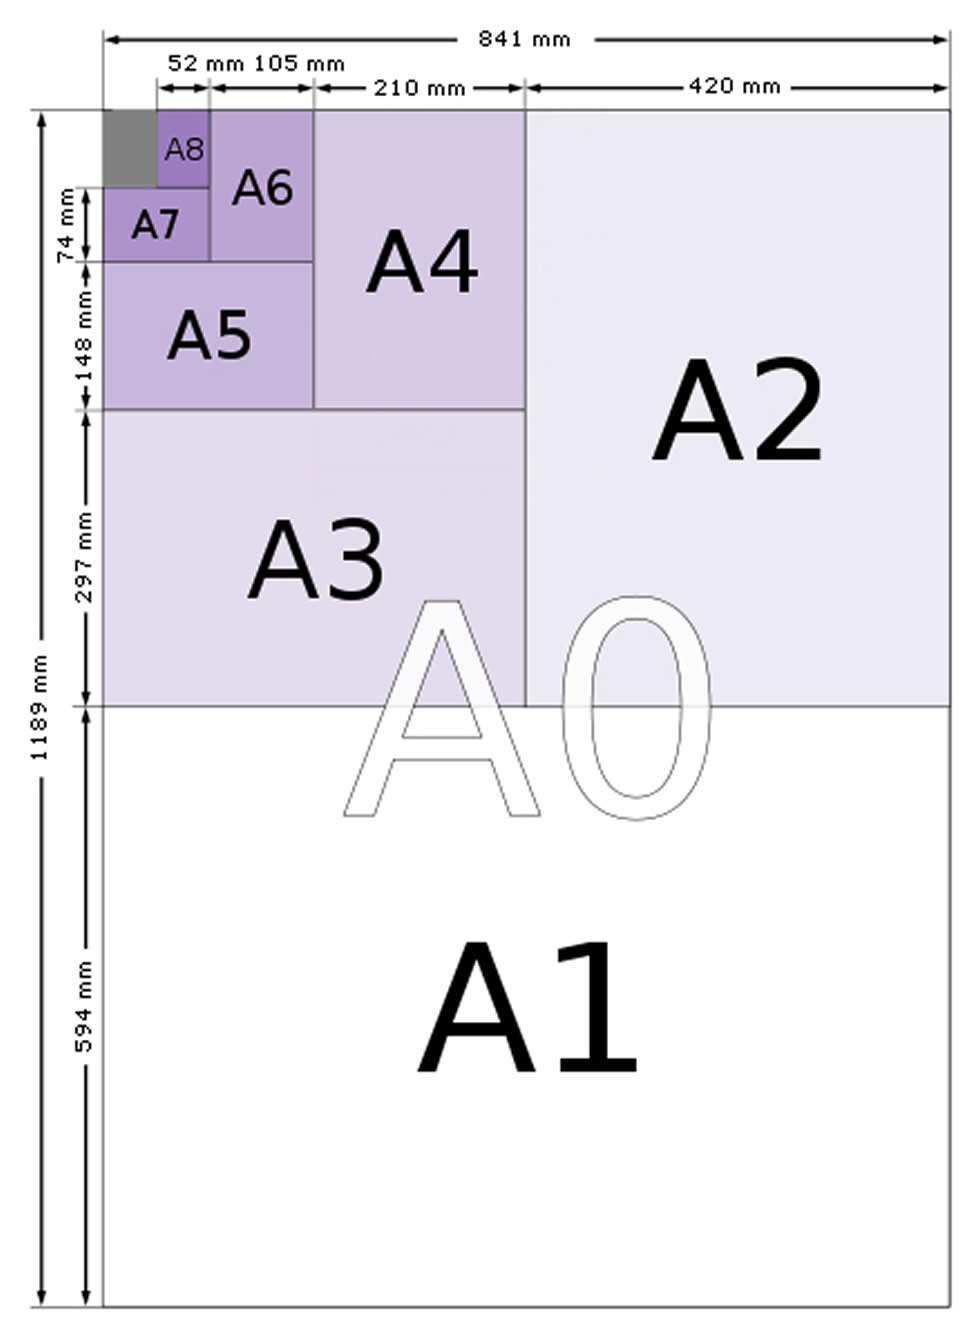 Diagram of A Paper Sizes & Their Relationships